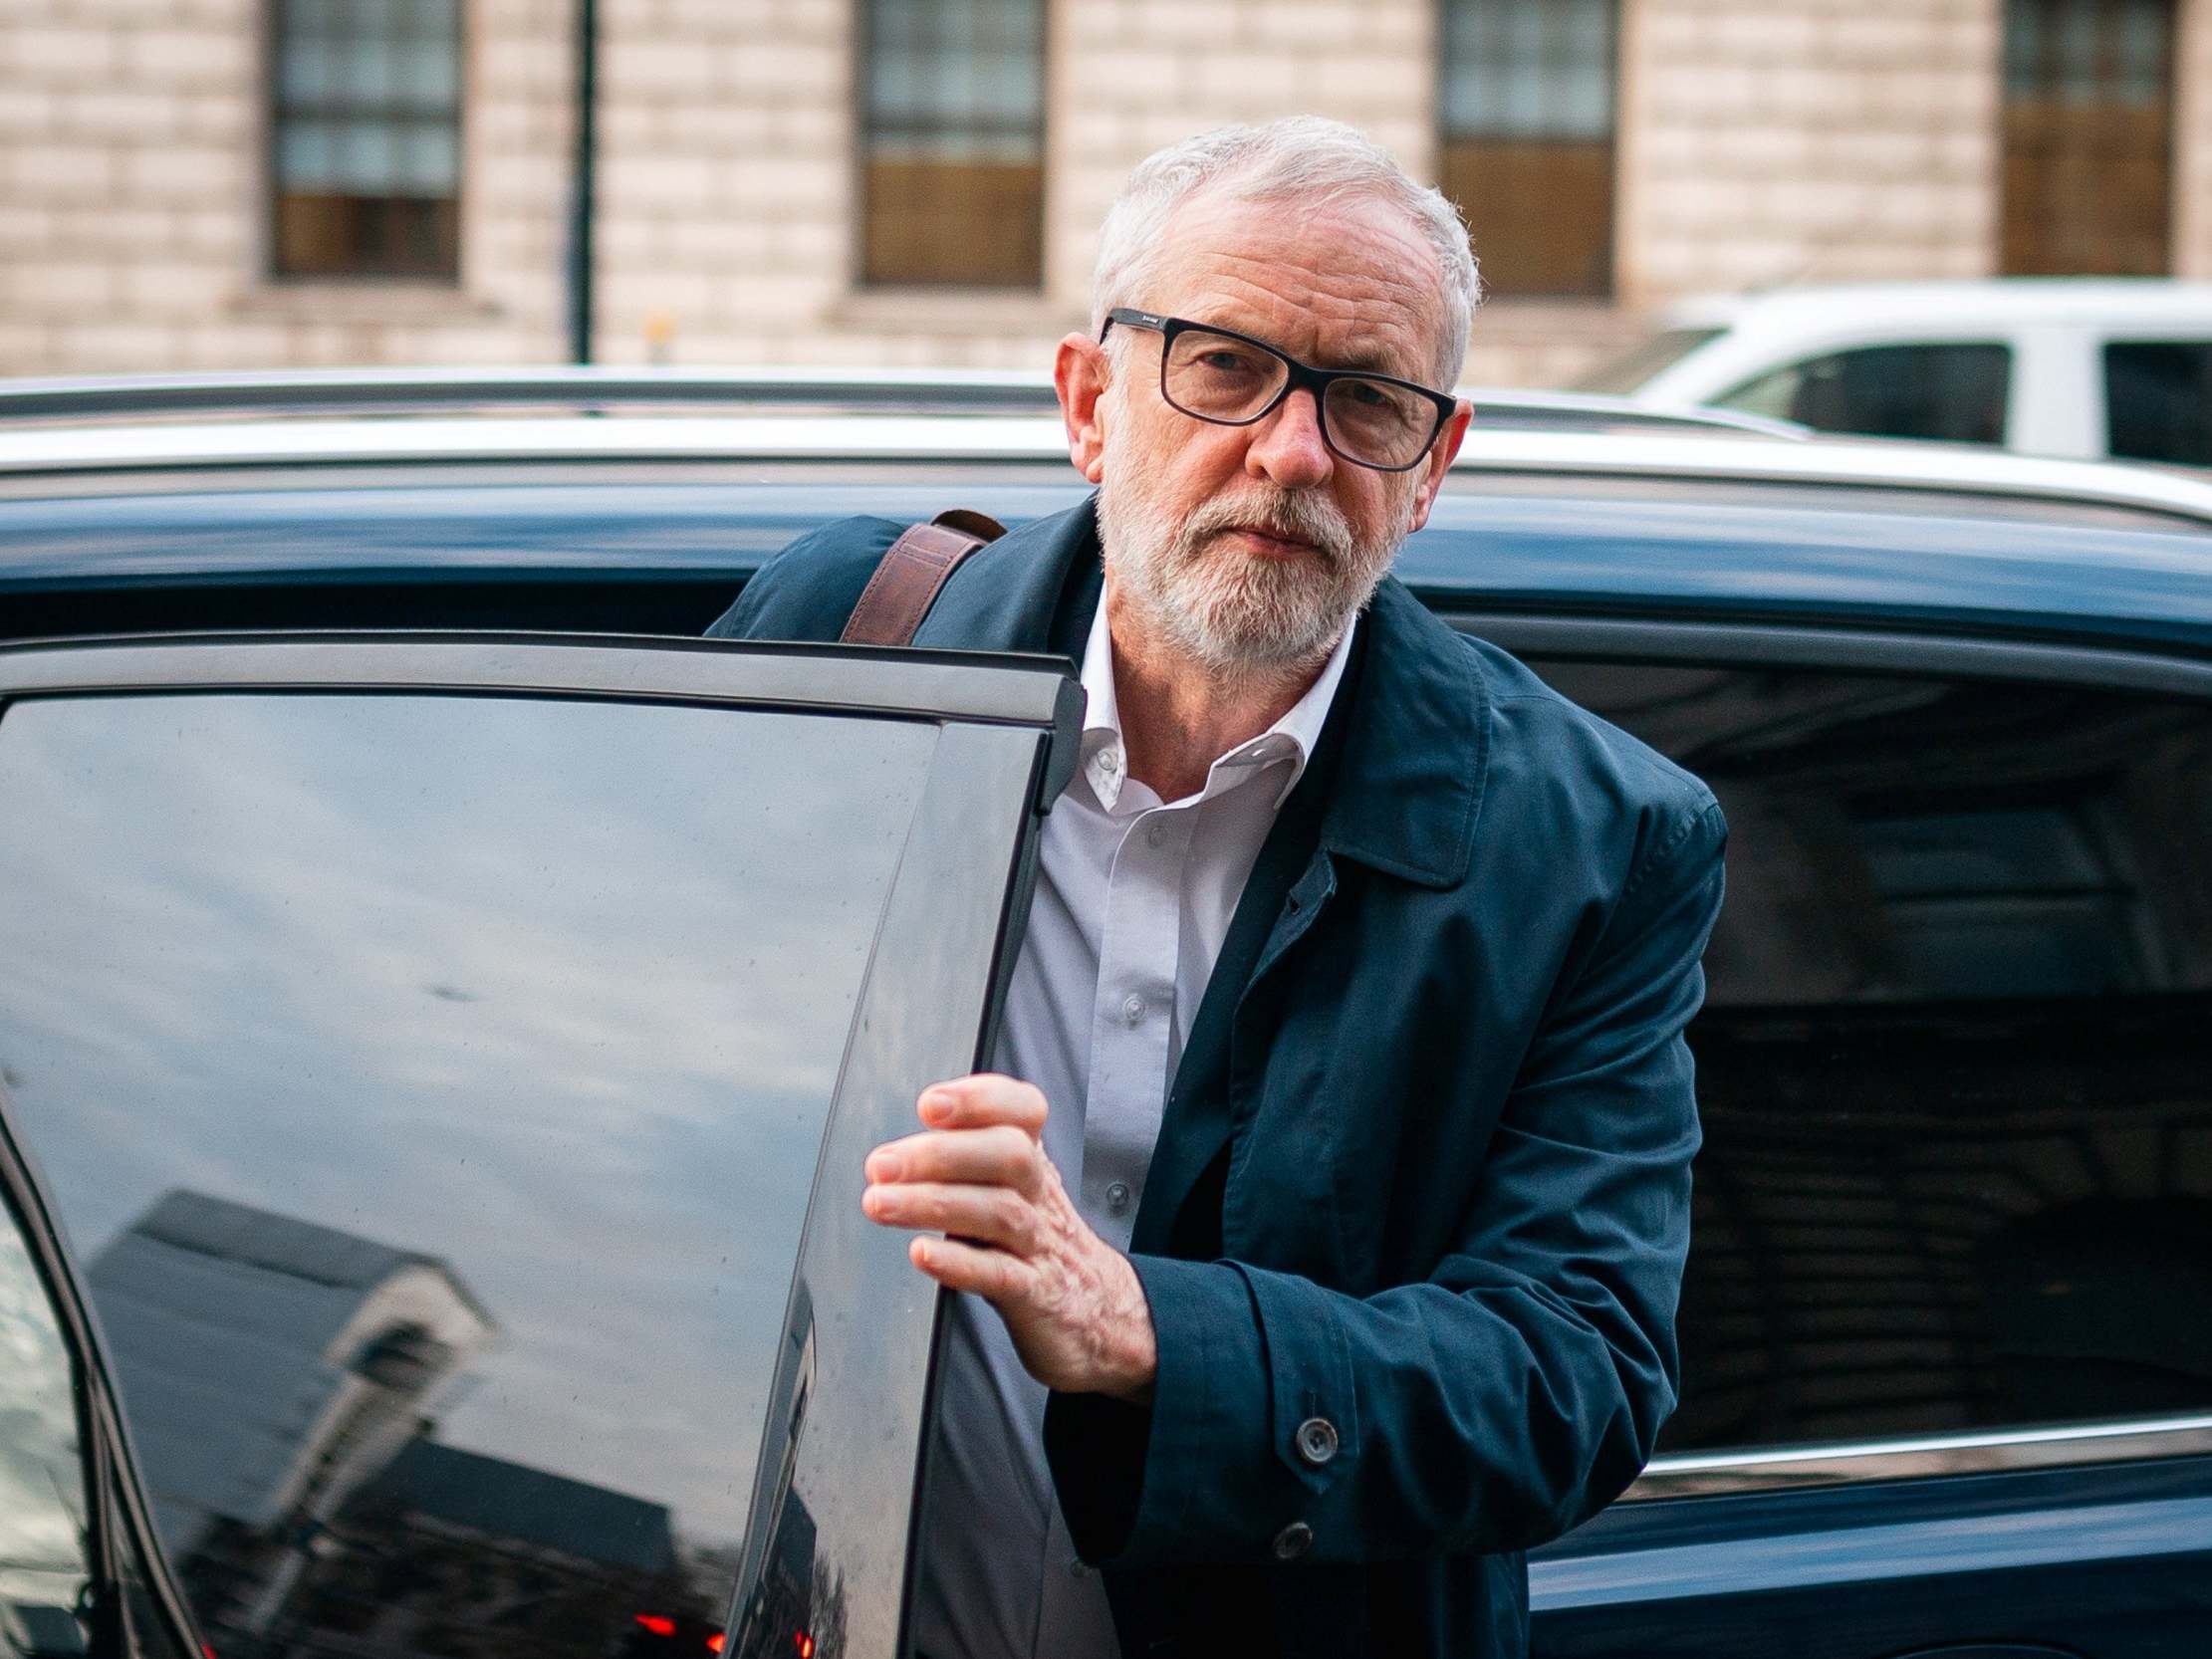 The incumbent Labour leader was perhaps 10 seats away from becoming PM in 2017